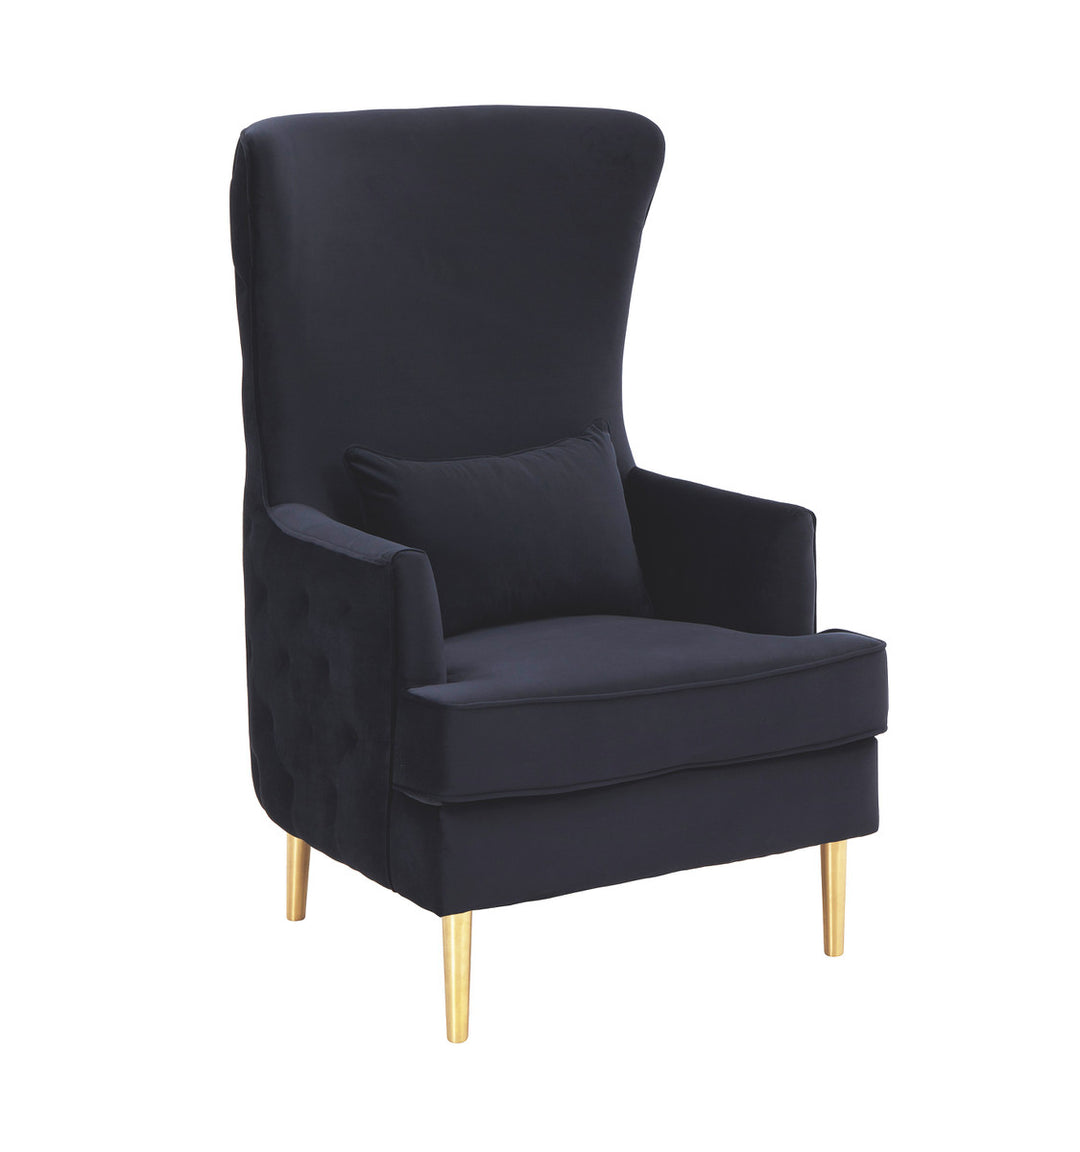 Aline Black Tall Tufted Back Chair